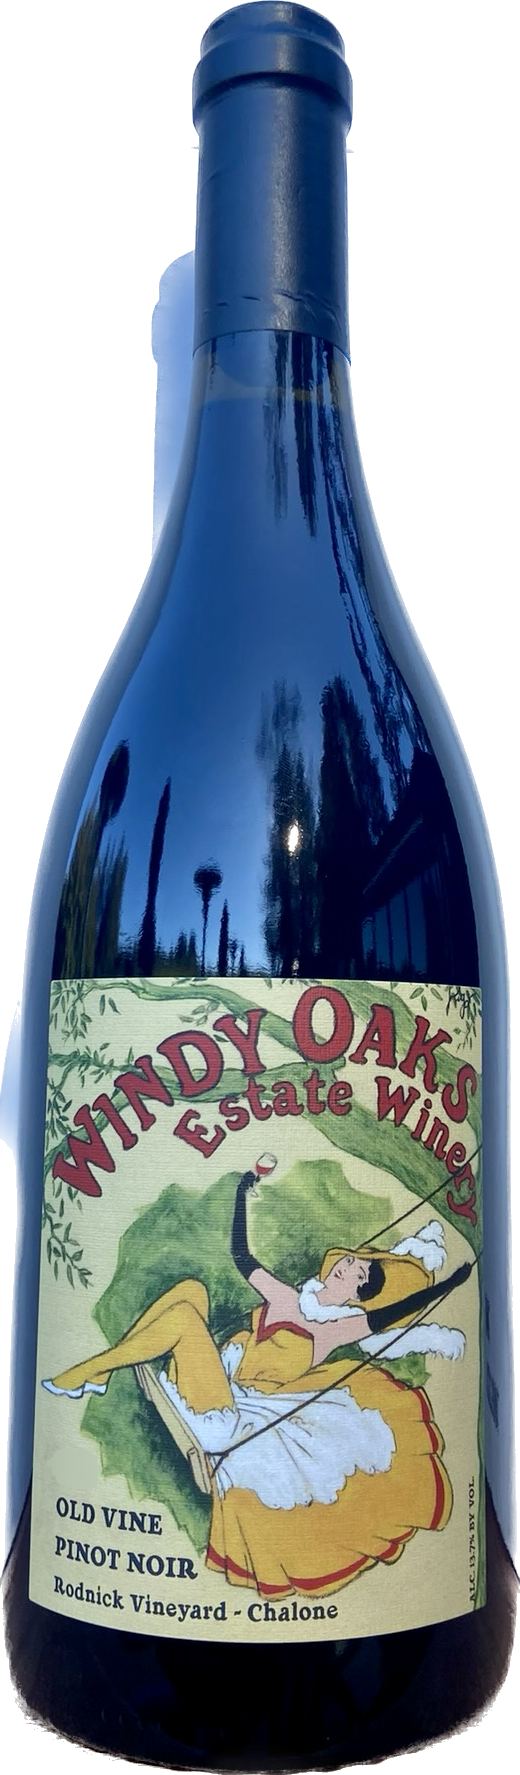 Product Image for 2018 Pinot Noir, Old Vine, Chalone